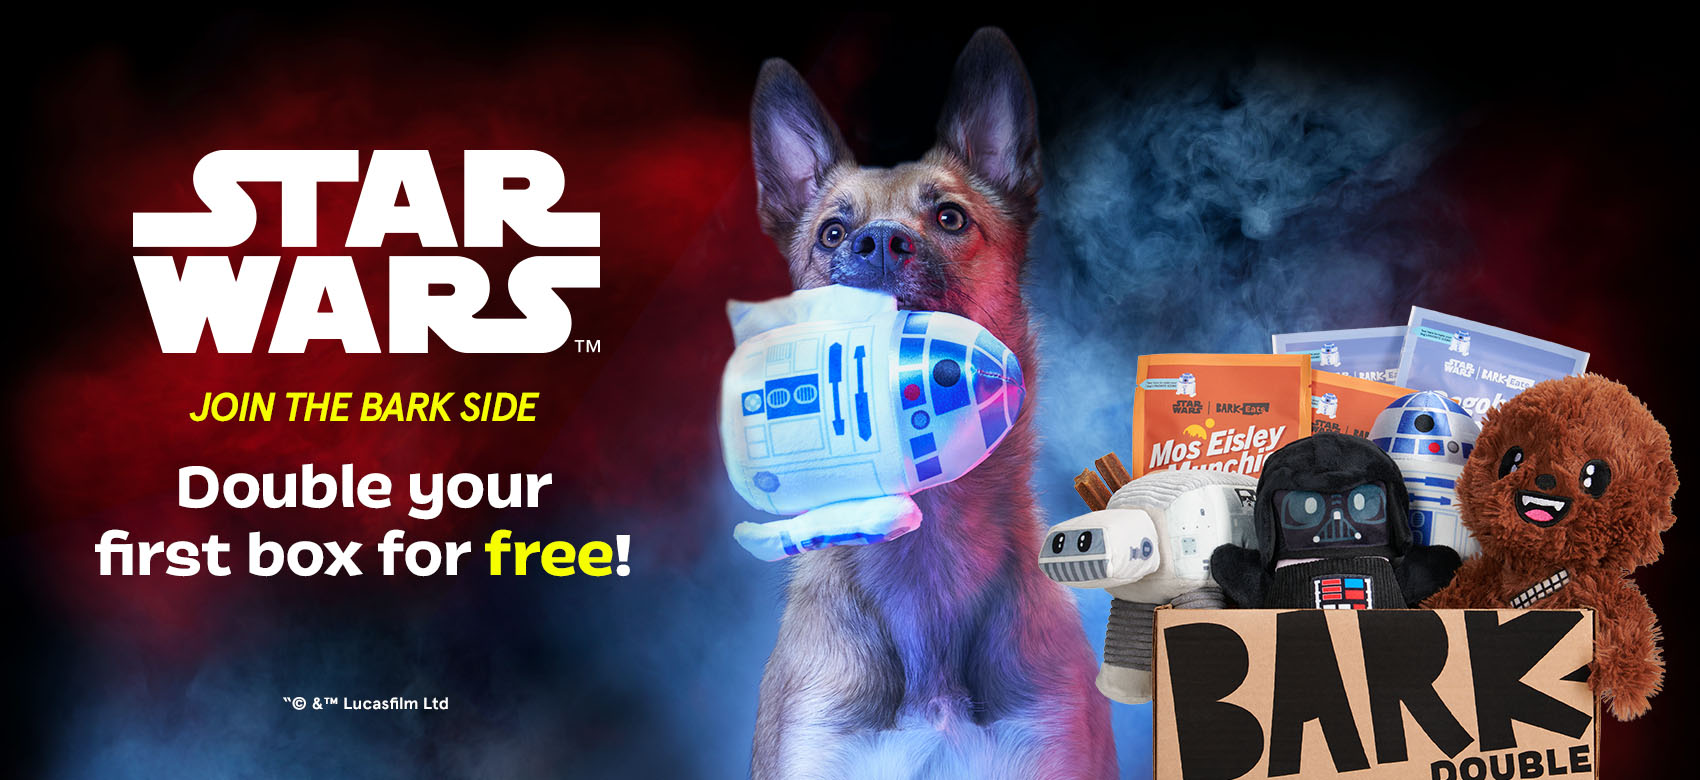 Star Wars - Join the Bark Side. Double your first box for free!